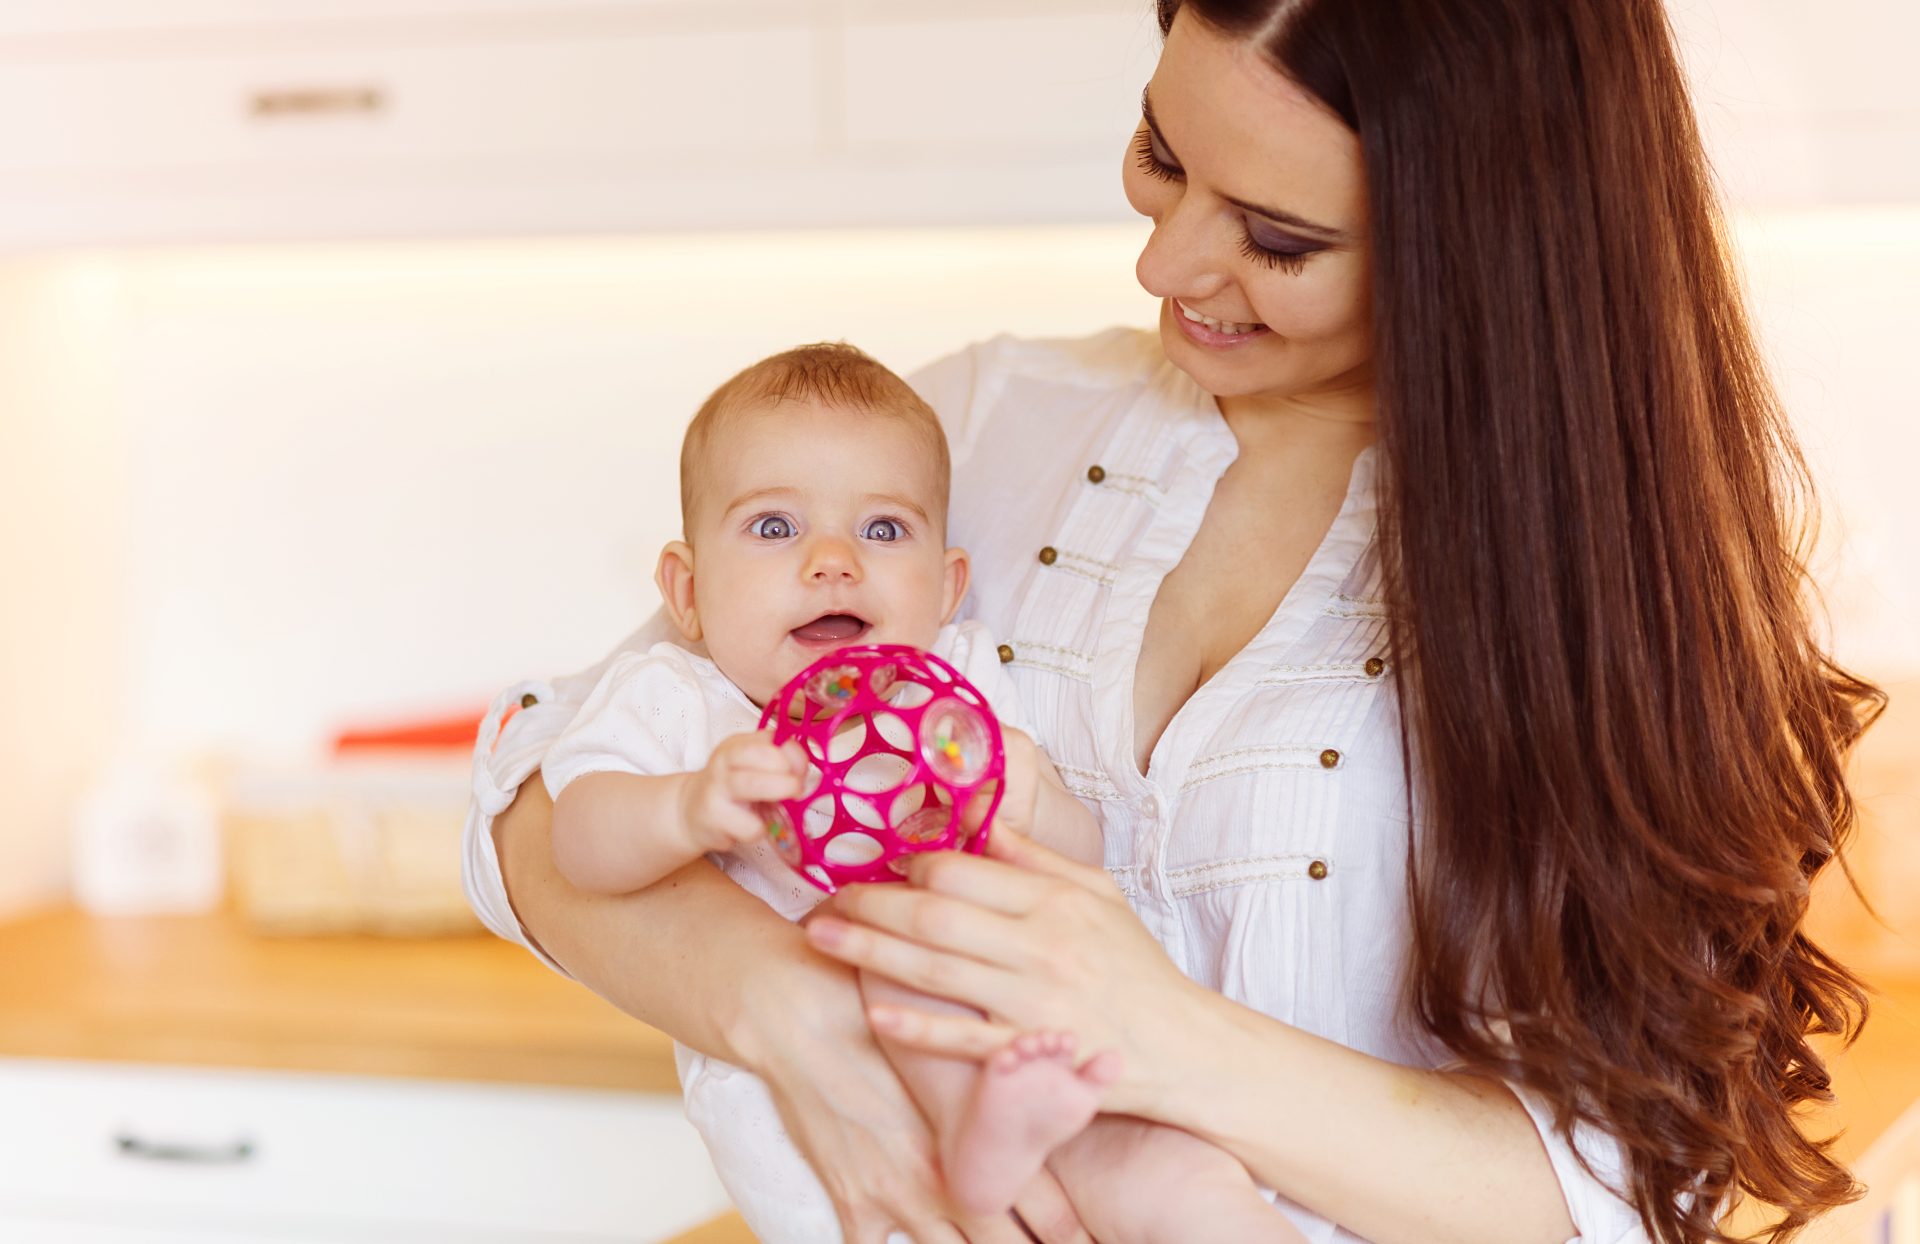 5 Tips for Selecting the Best Educational Toys for Your Baby